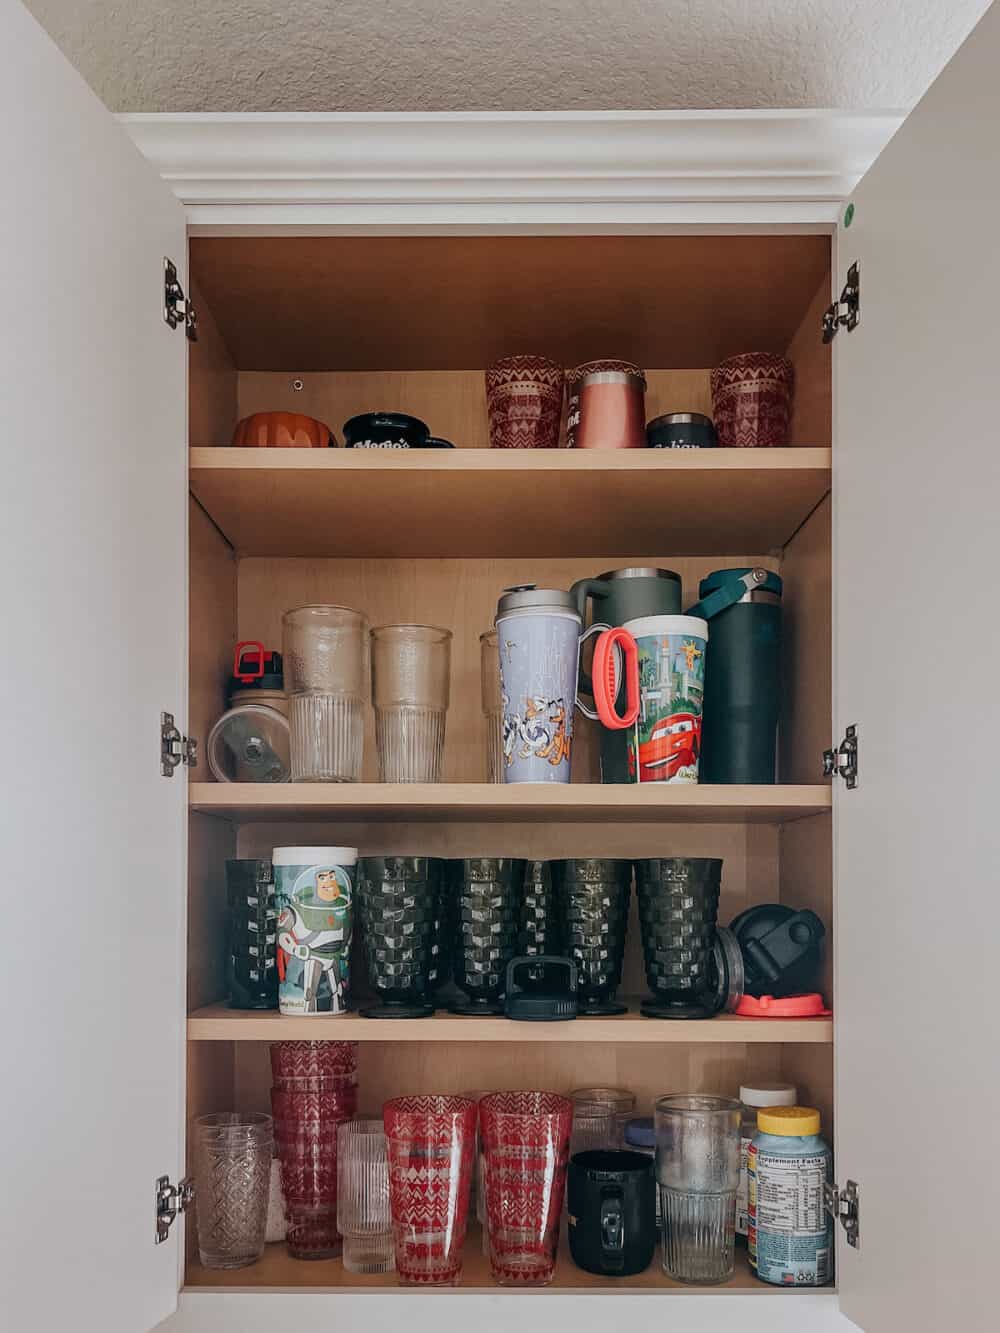 Cup cabinet before organizing